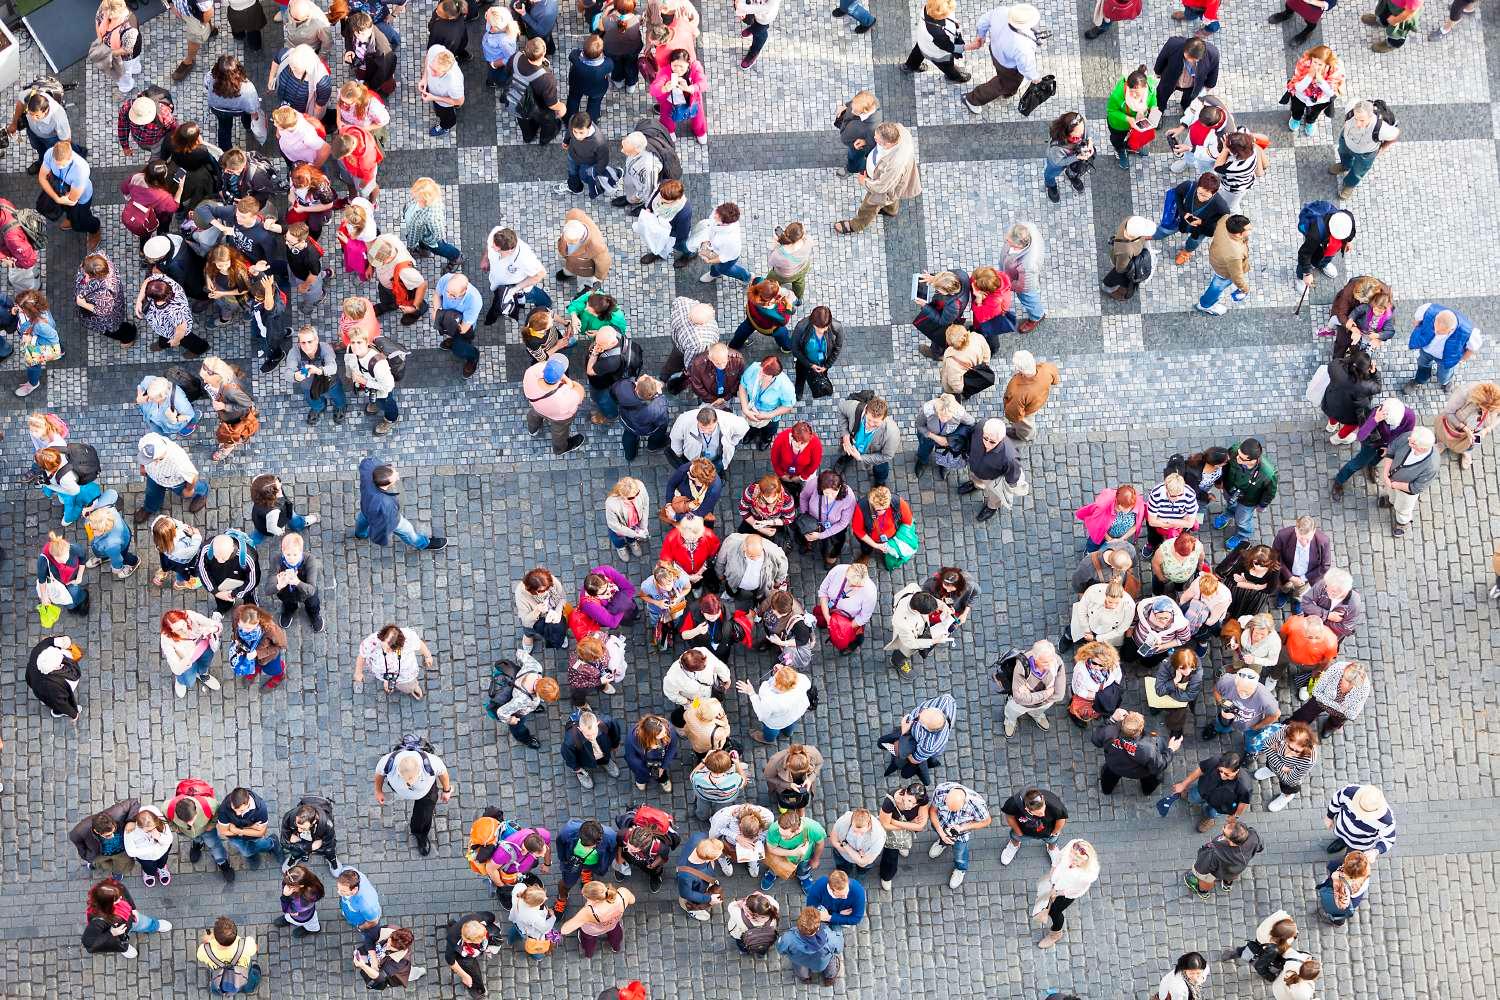 Crowd of People, Old Town Square, Prague, Czech Republic